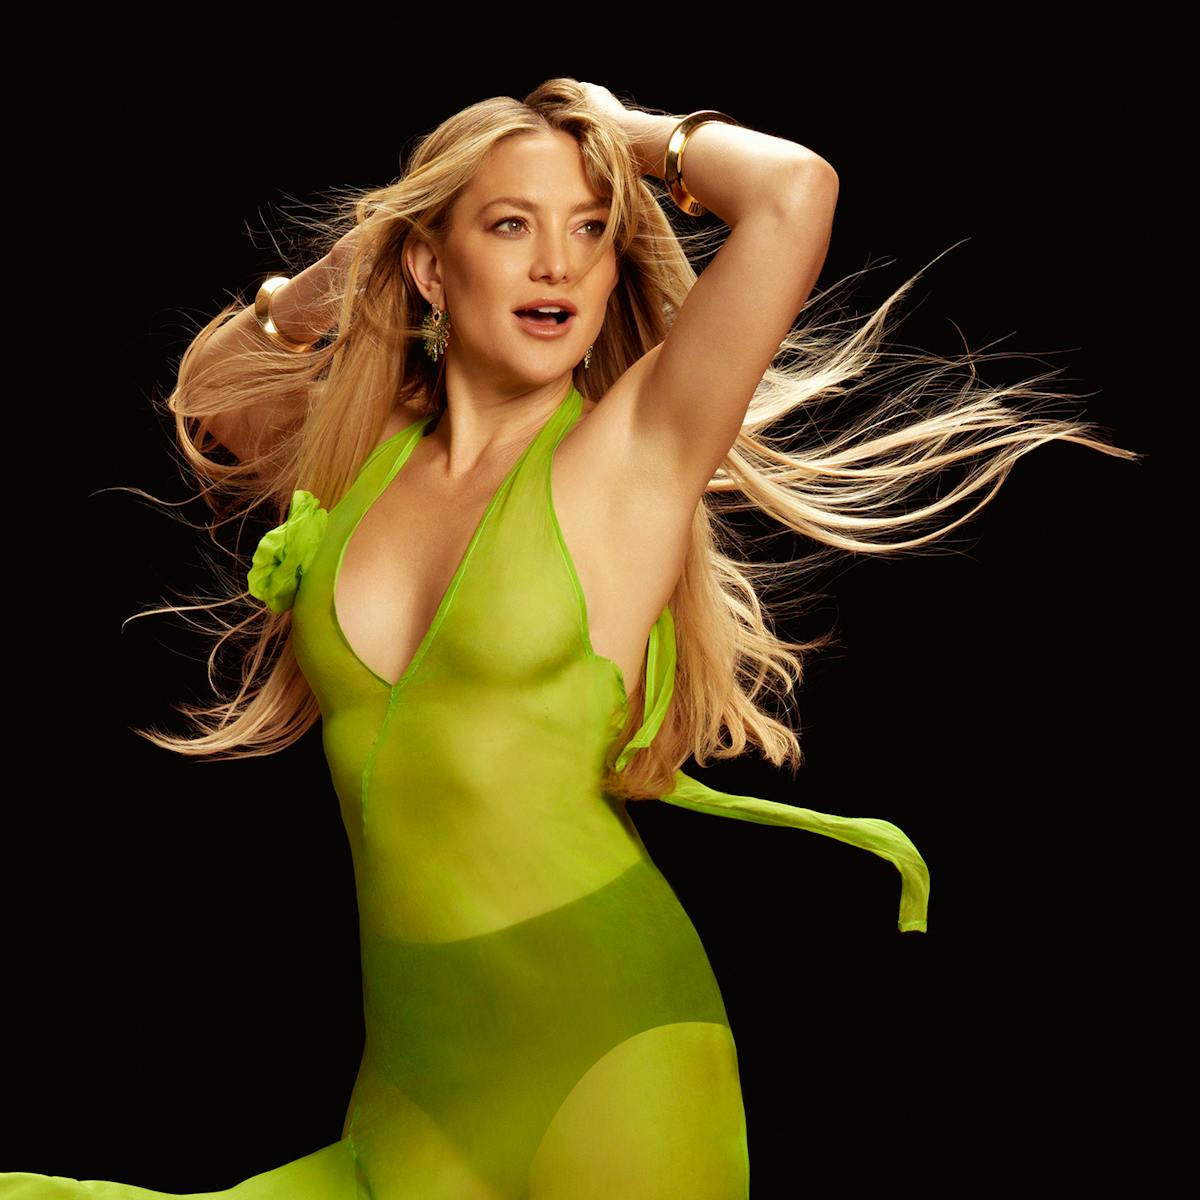 Kate Hudson wears a green dress and black underwear, striking a pose against a black background.